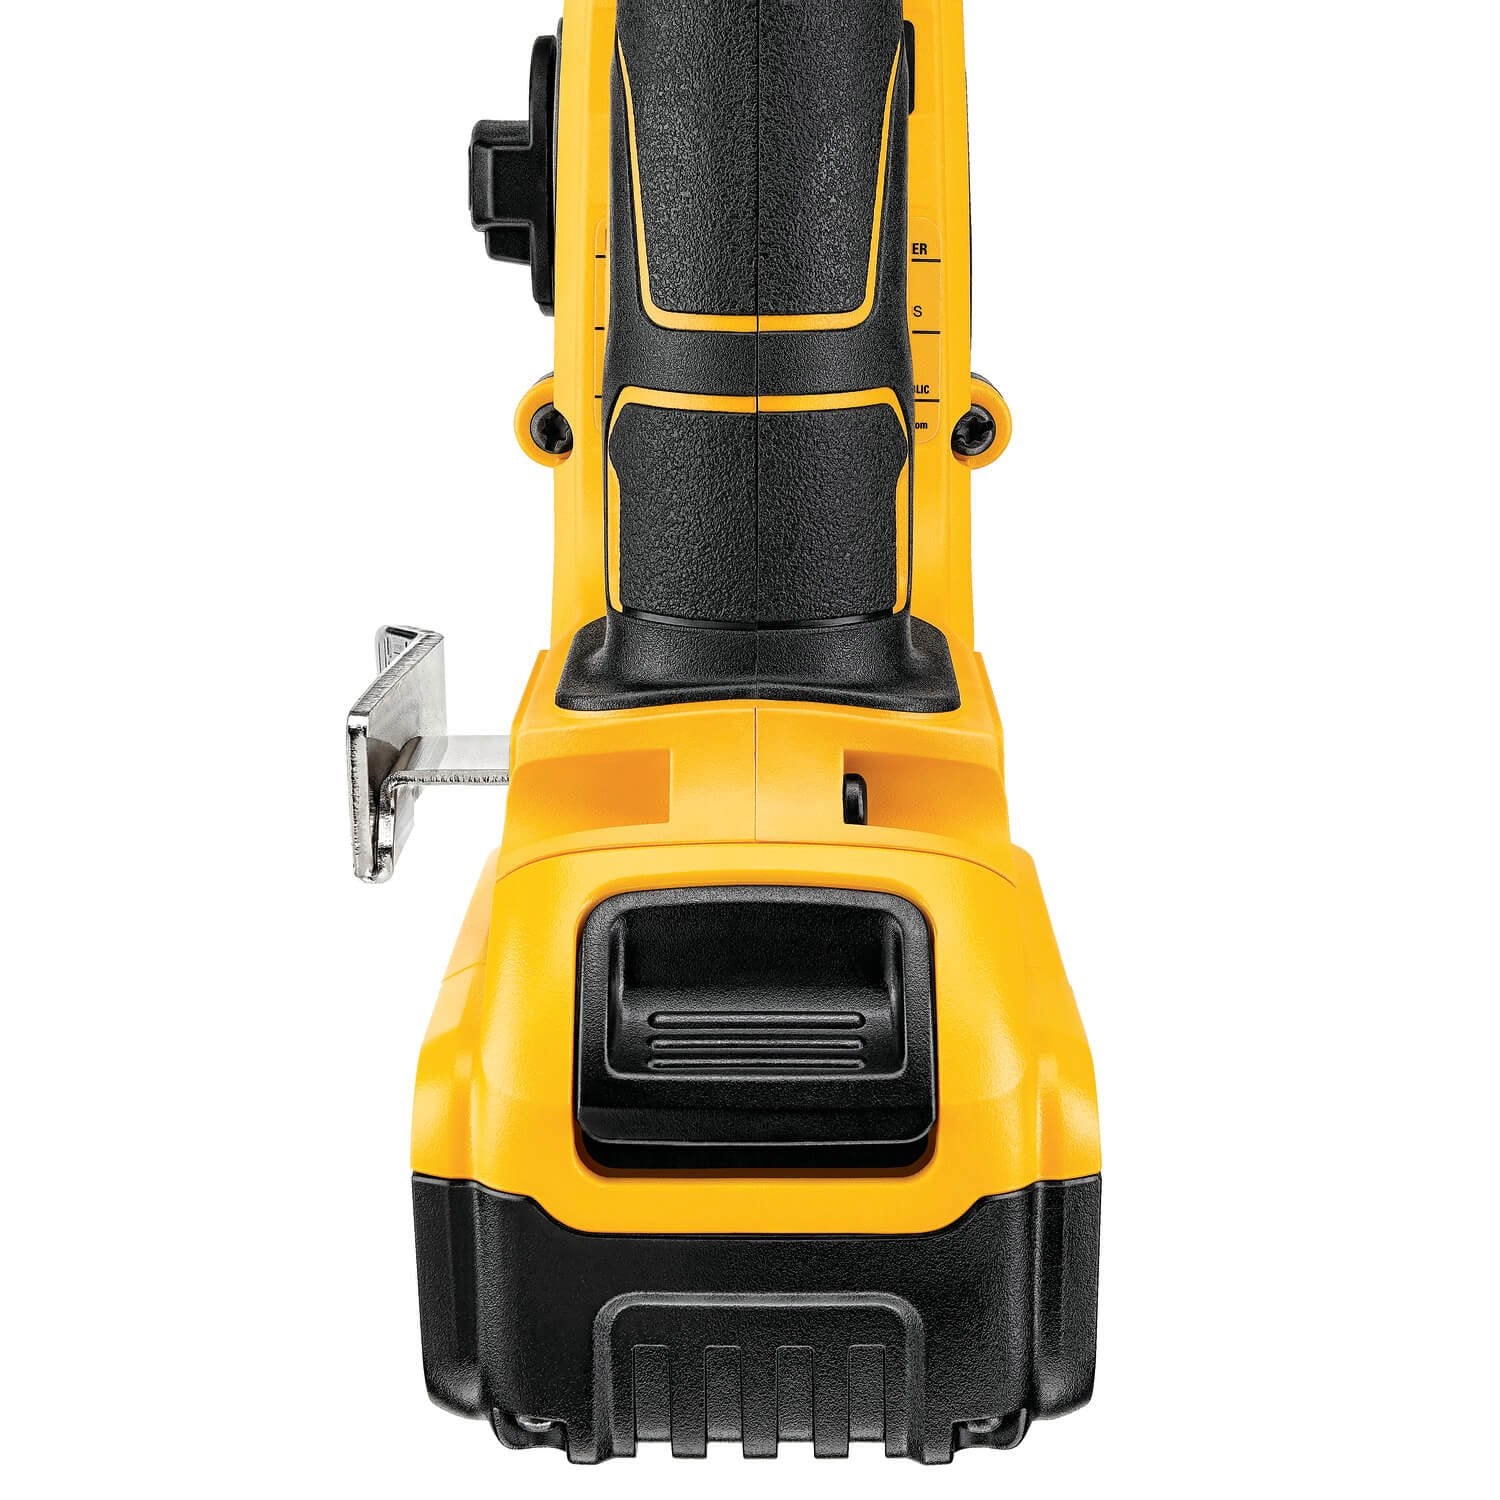 DEWALT DCH273P2 20V Max Brushless SDS Rotary Hammer with 5 Ah Batteries